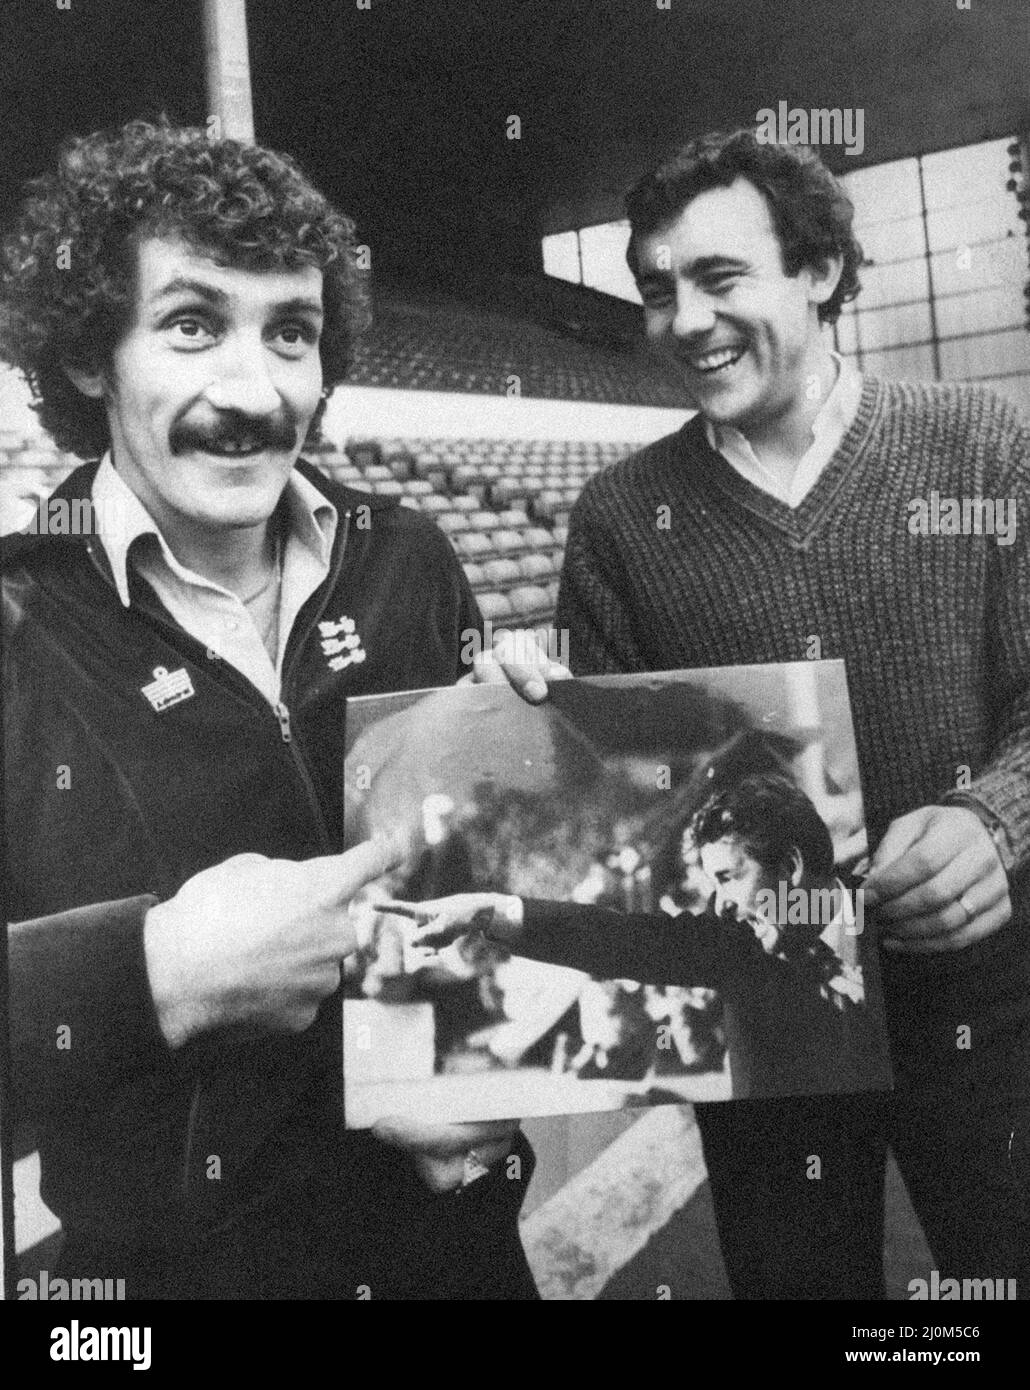 Terry McDermott and Ray Kennedy Liverpool midfielders, will be facing Brian Clough's Nottingham Forest in the FA Cup this Saturday (8th November), pictured at Anfield, 7th November 1980. Stock Photo